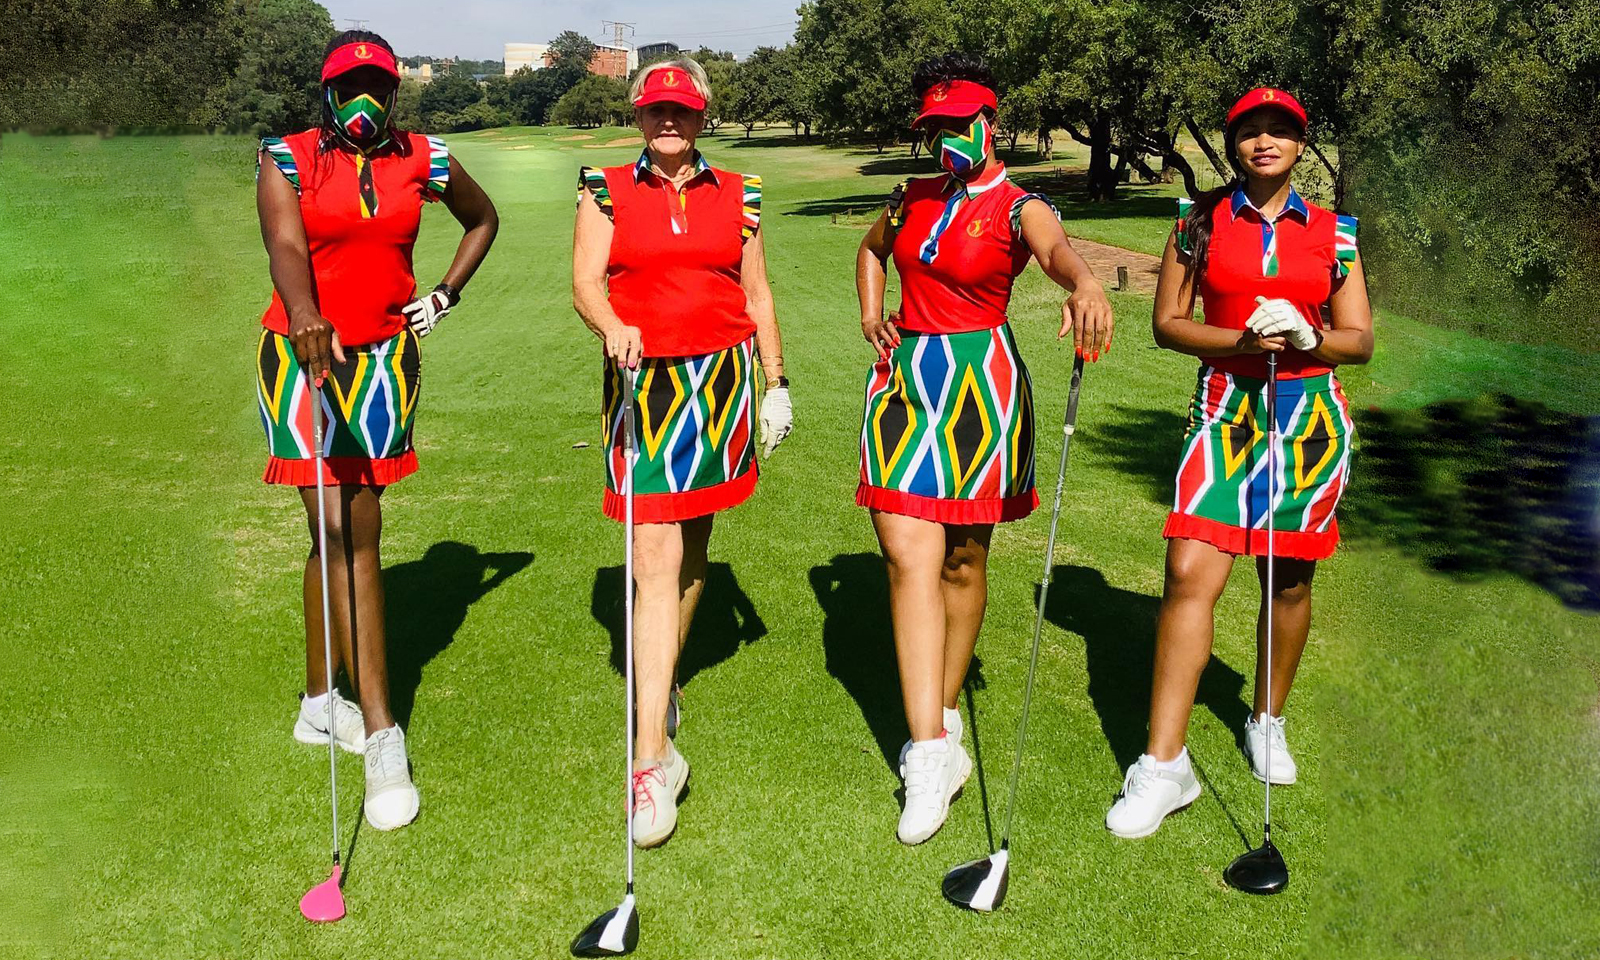 Women's Golf Day in South Africa